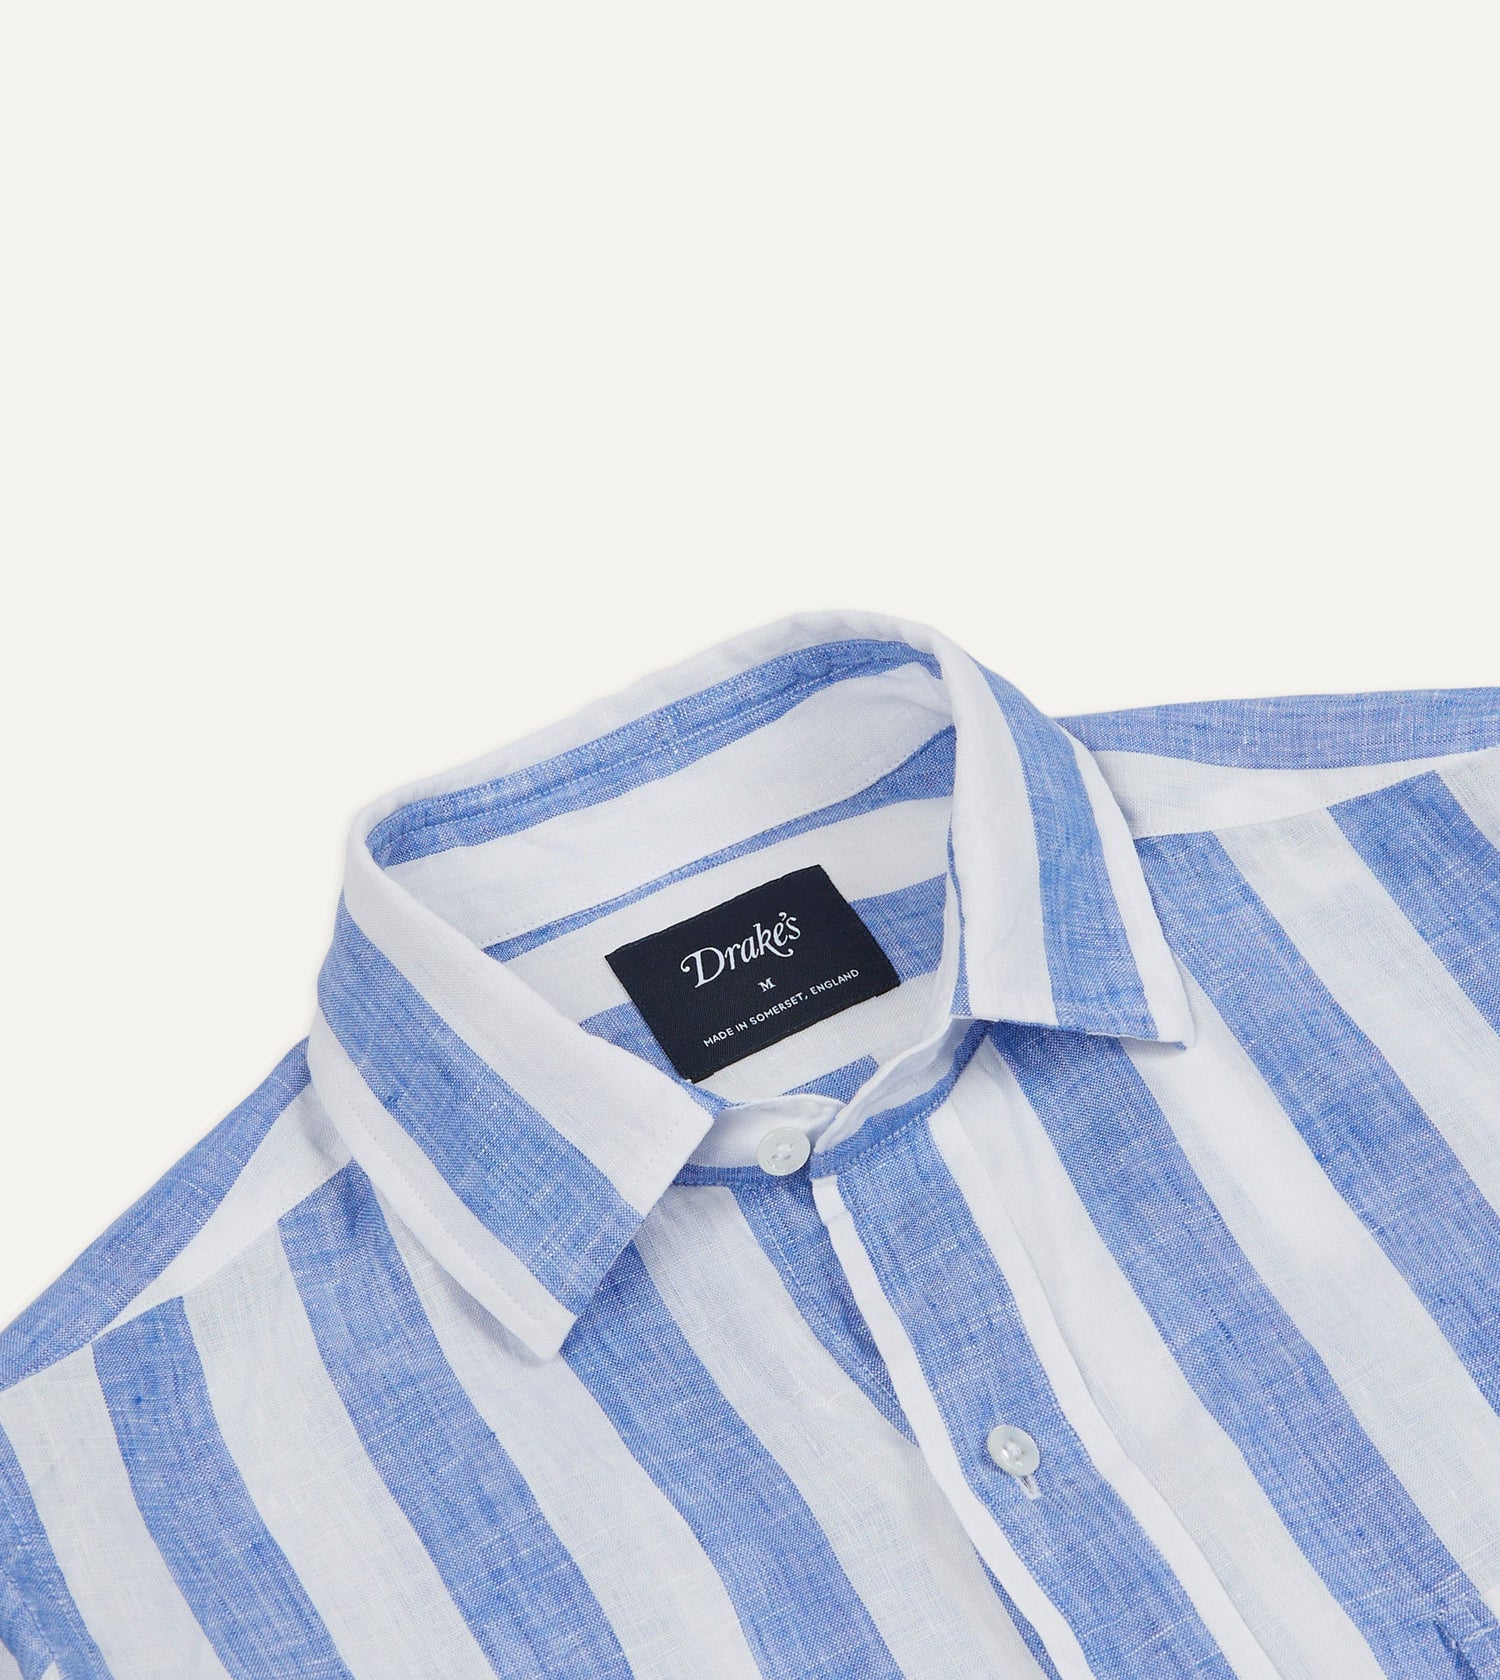 Blue and White Broad Stripe Linen Spread Collar Shirt